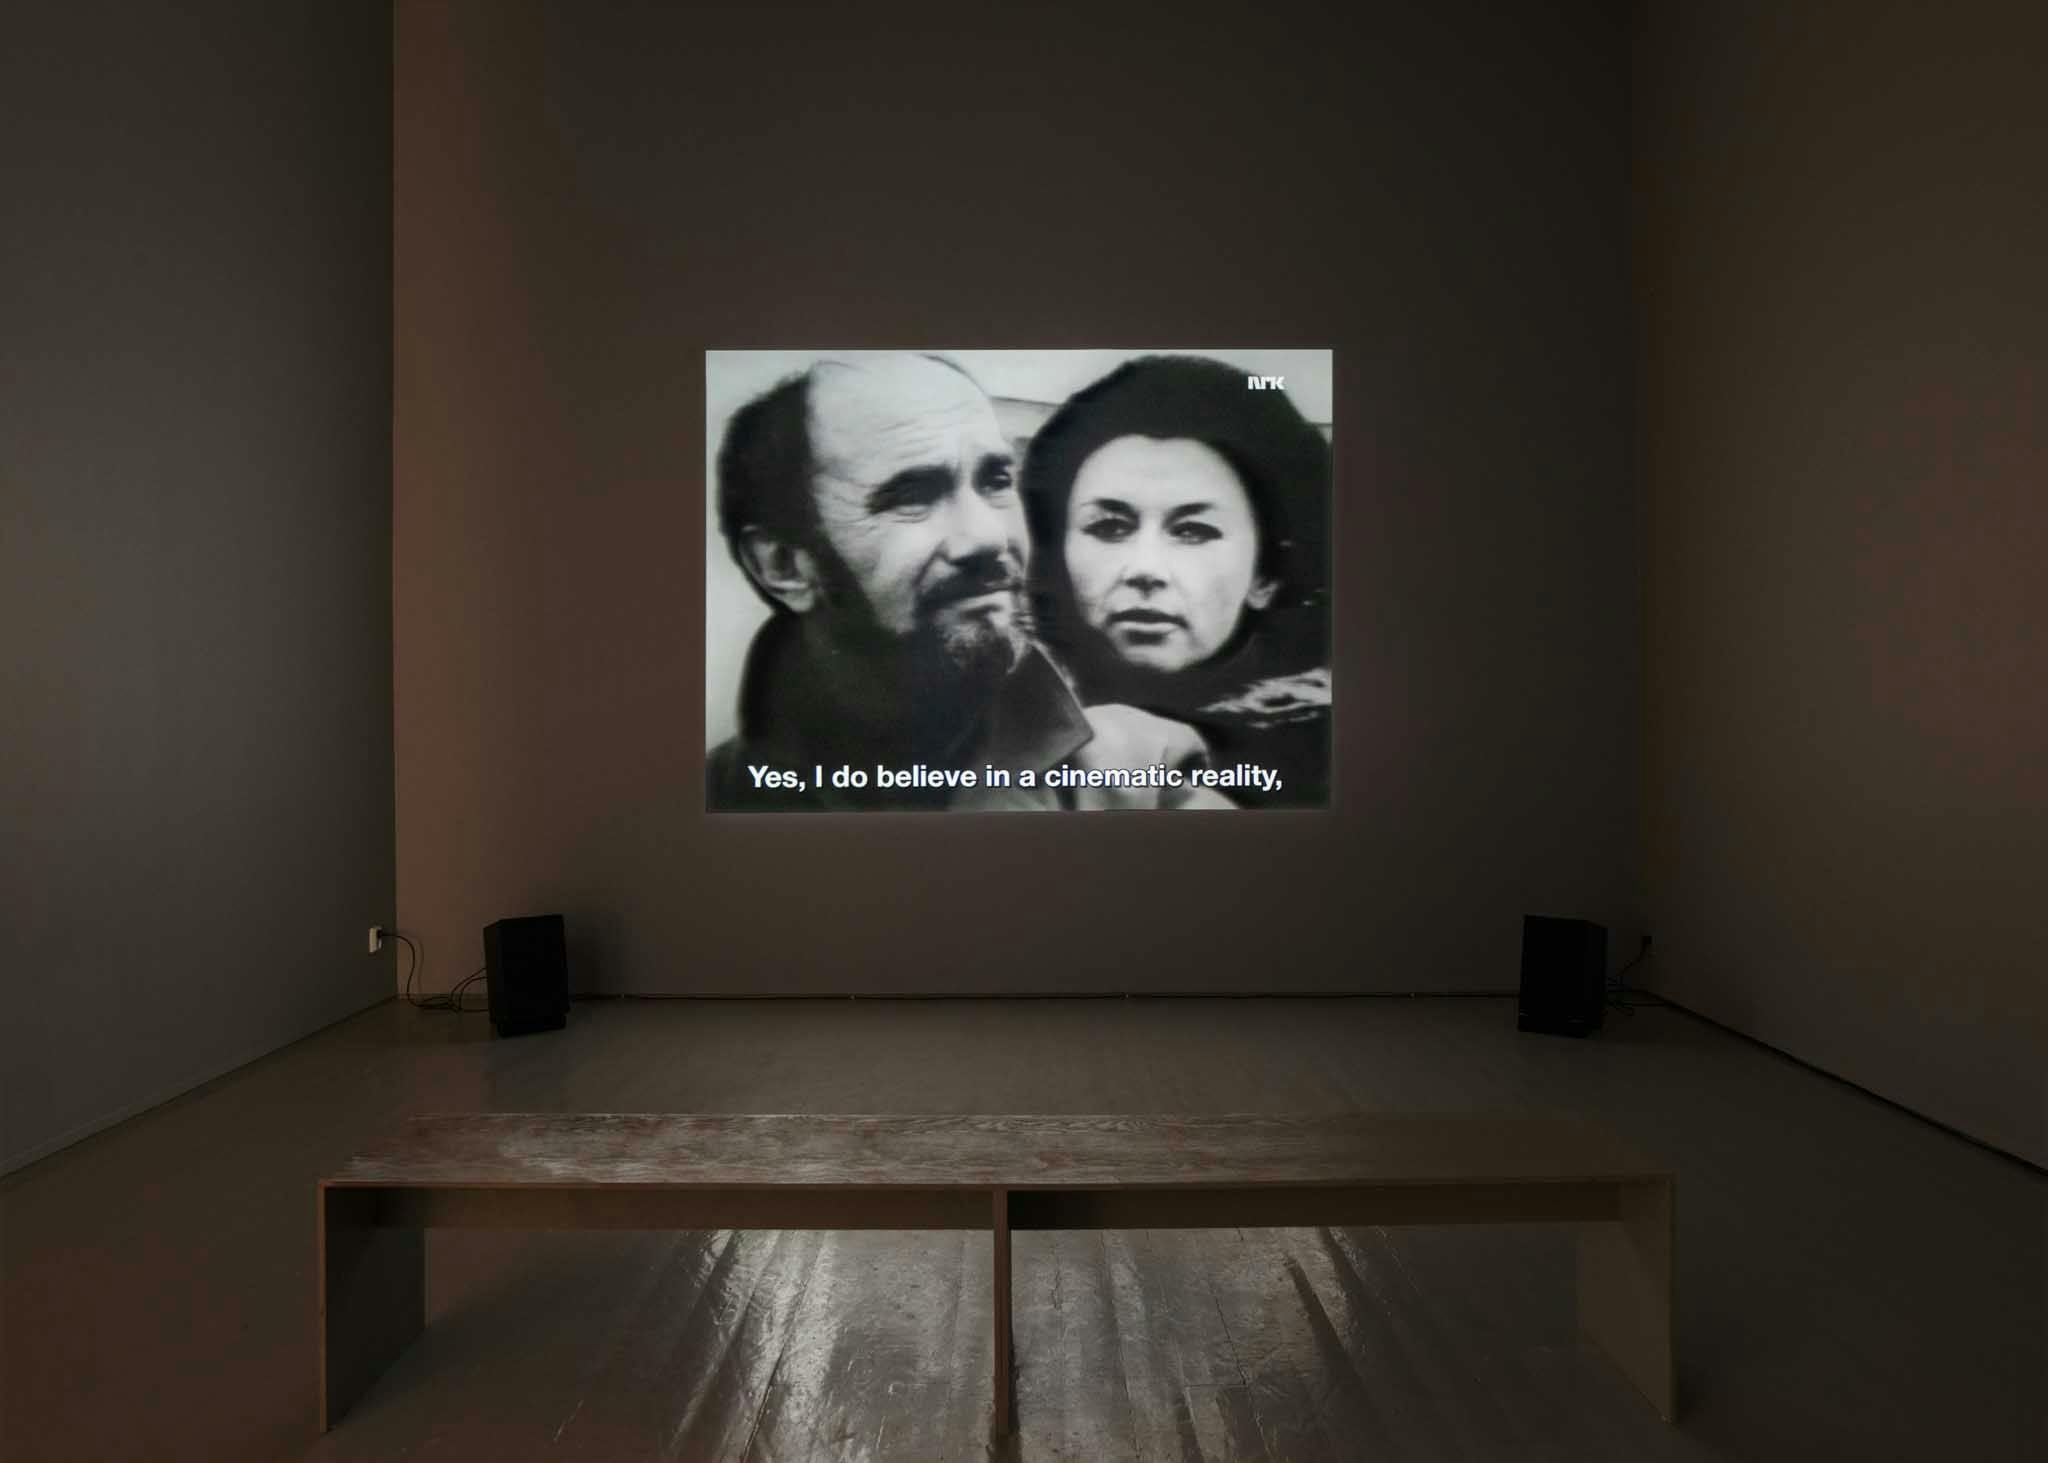 A bench sits in front of a projected image of a man and a woman in a grey gallery